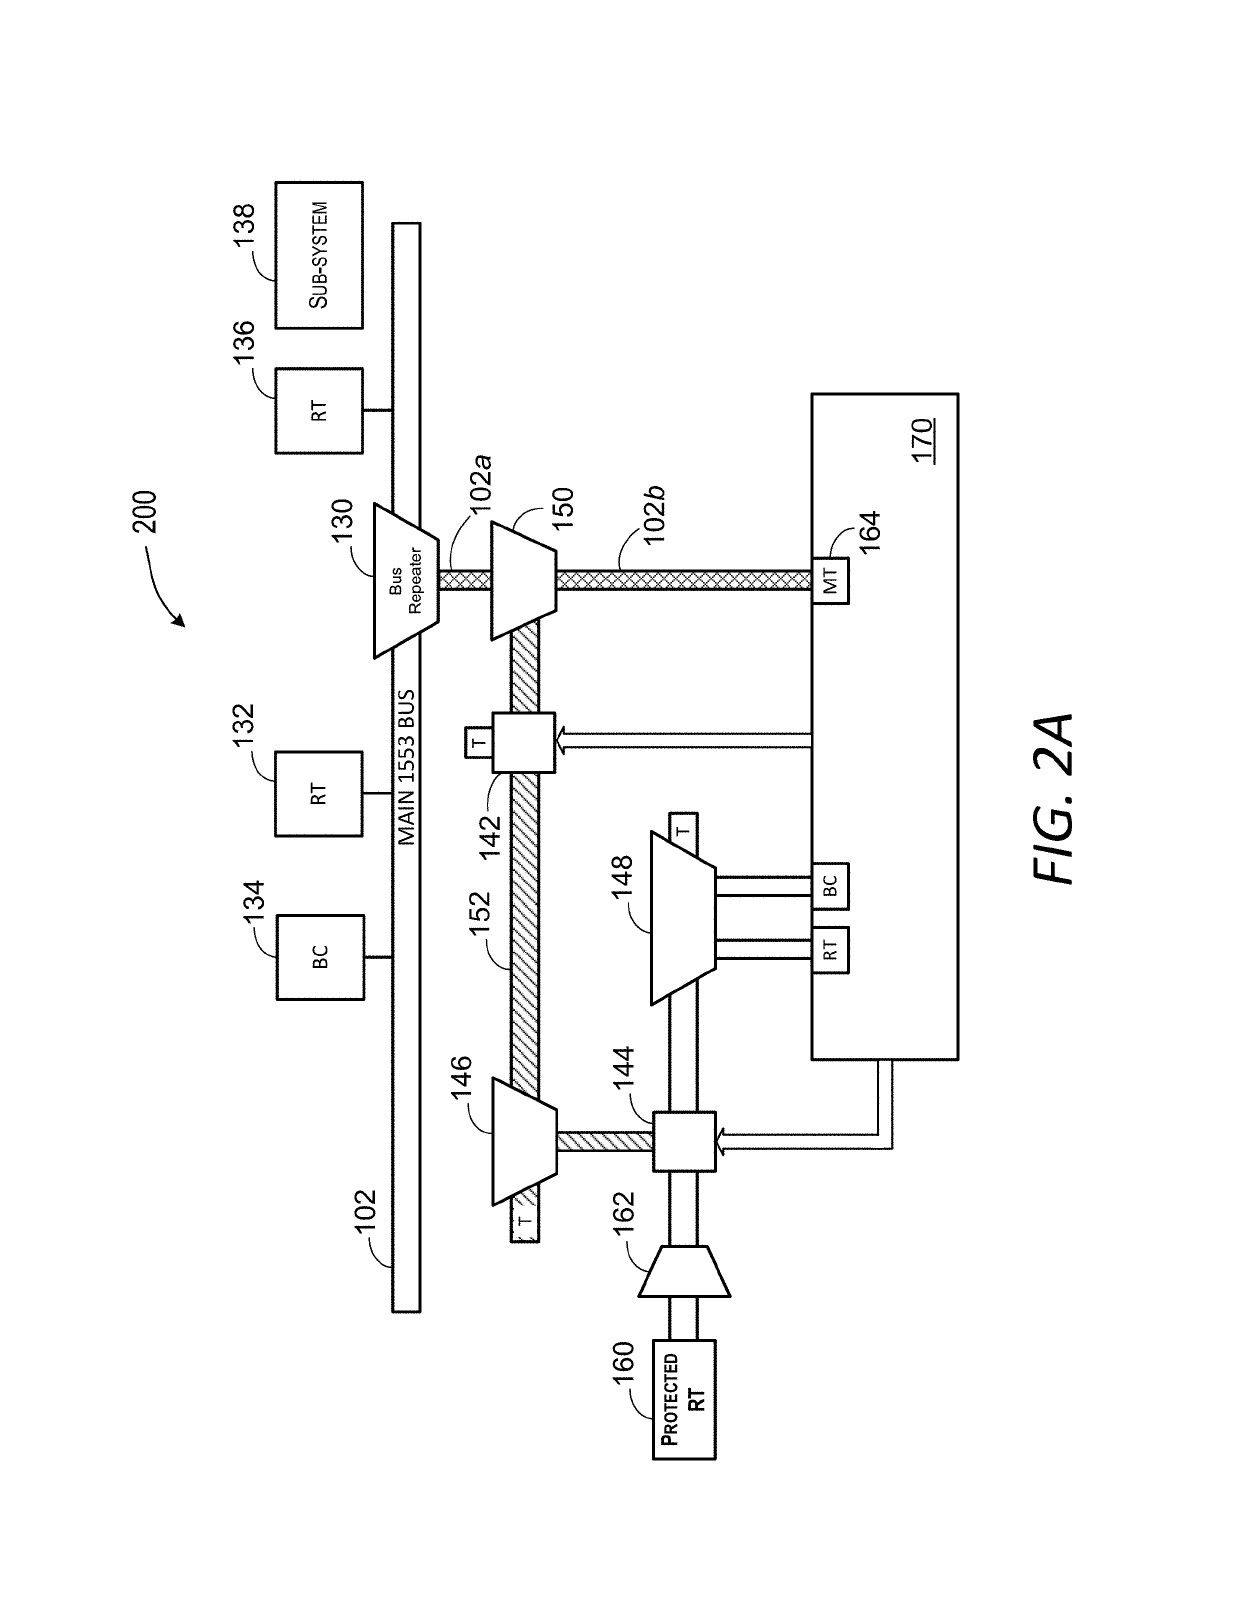 System and method of monitoring data traffic on a MIL-STD-1553 data bus